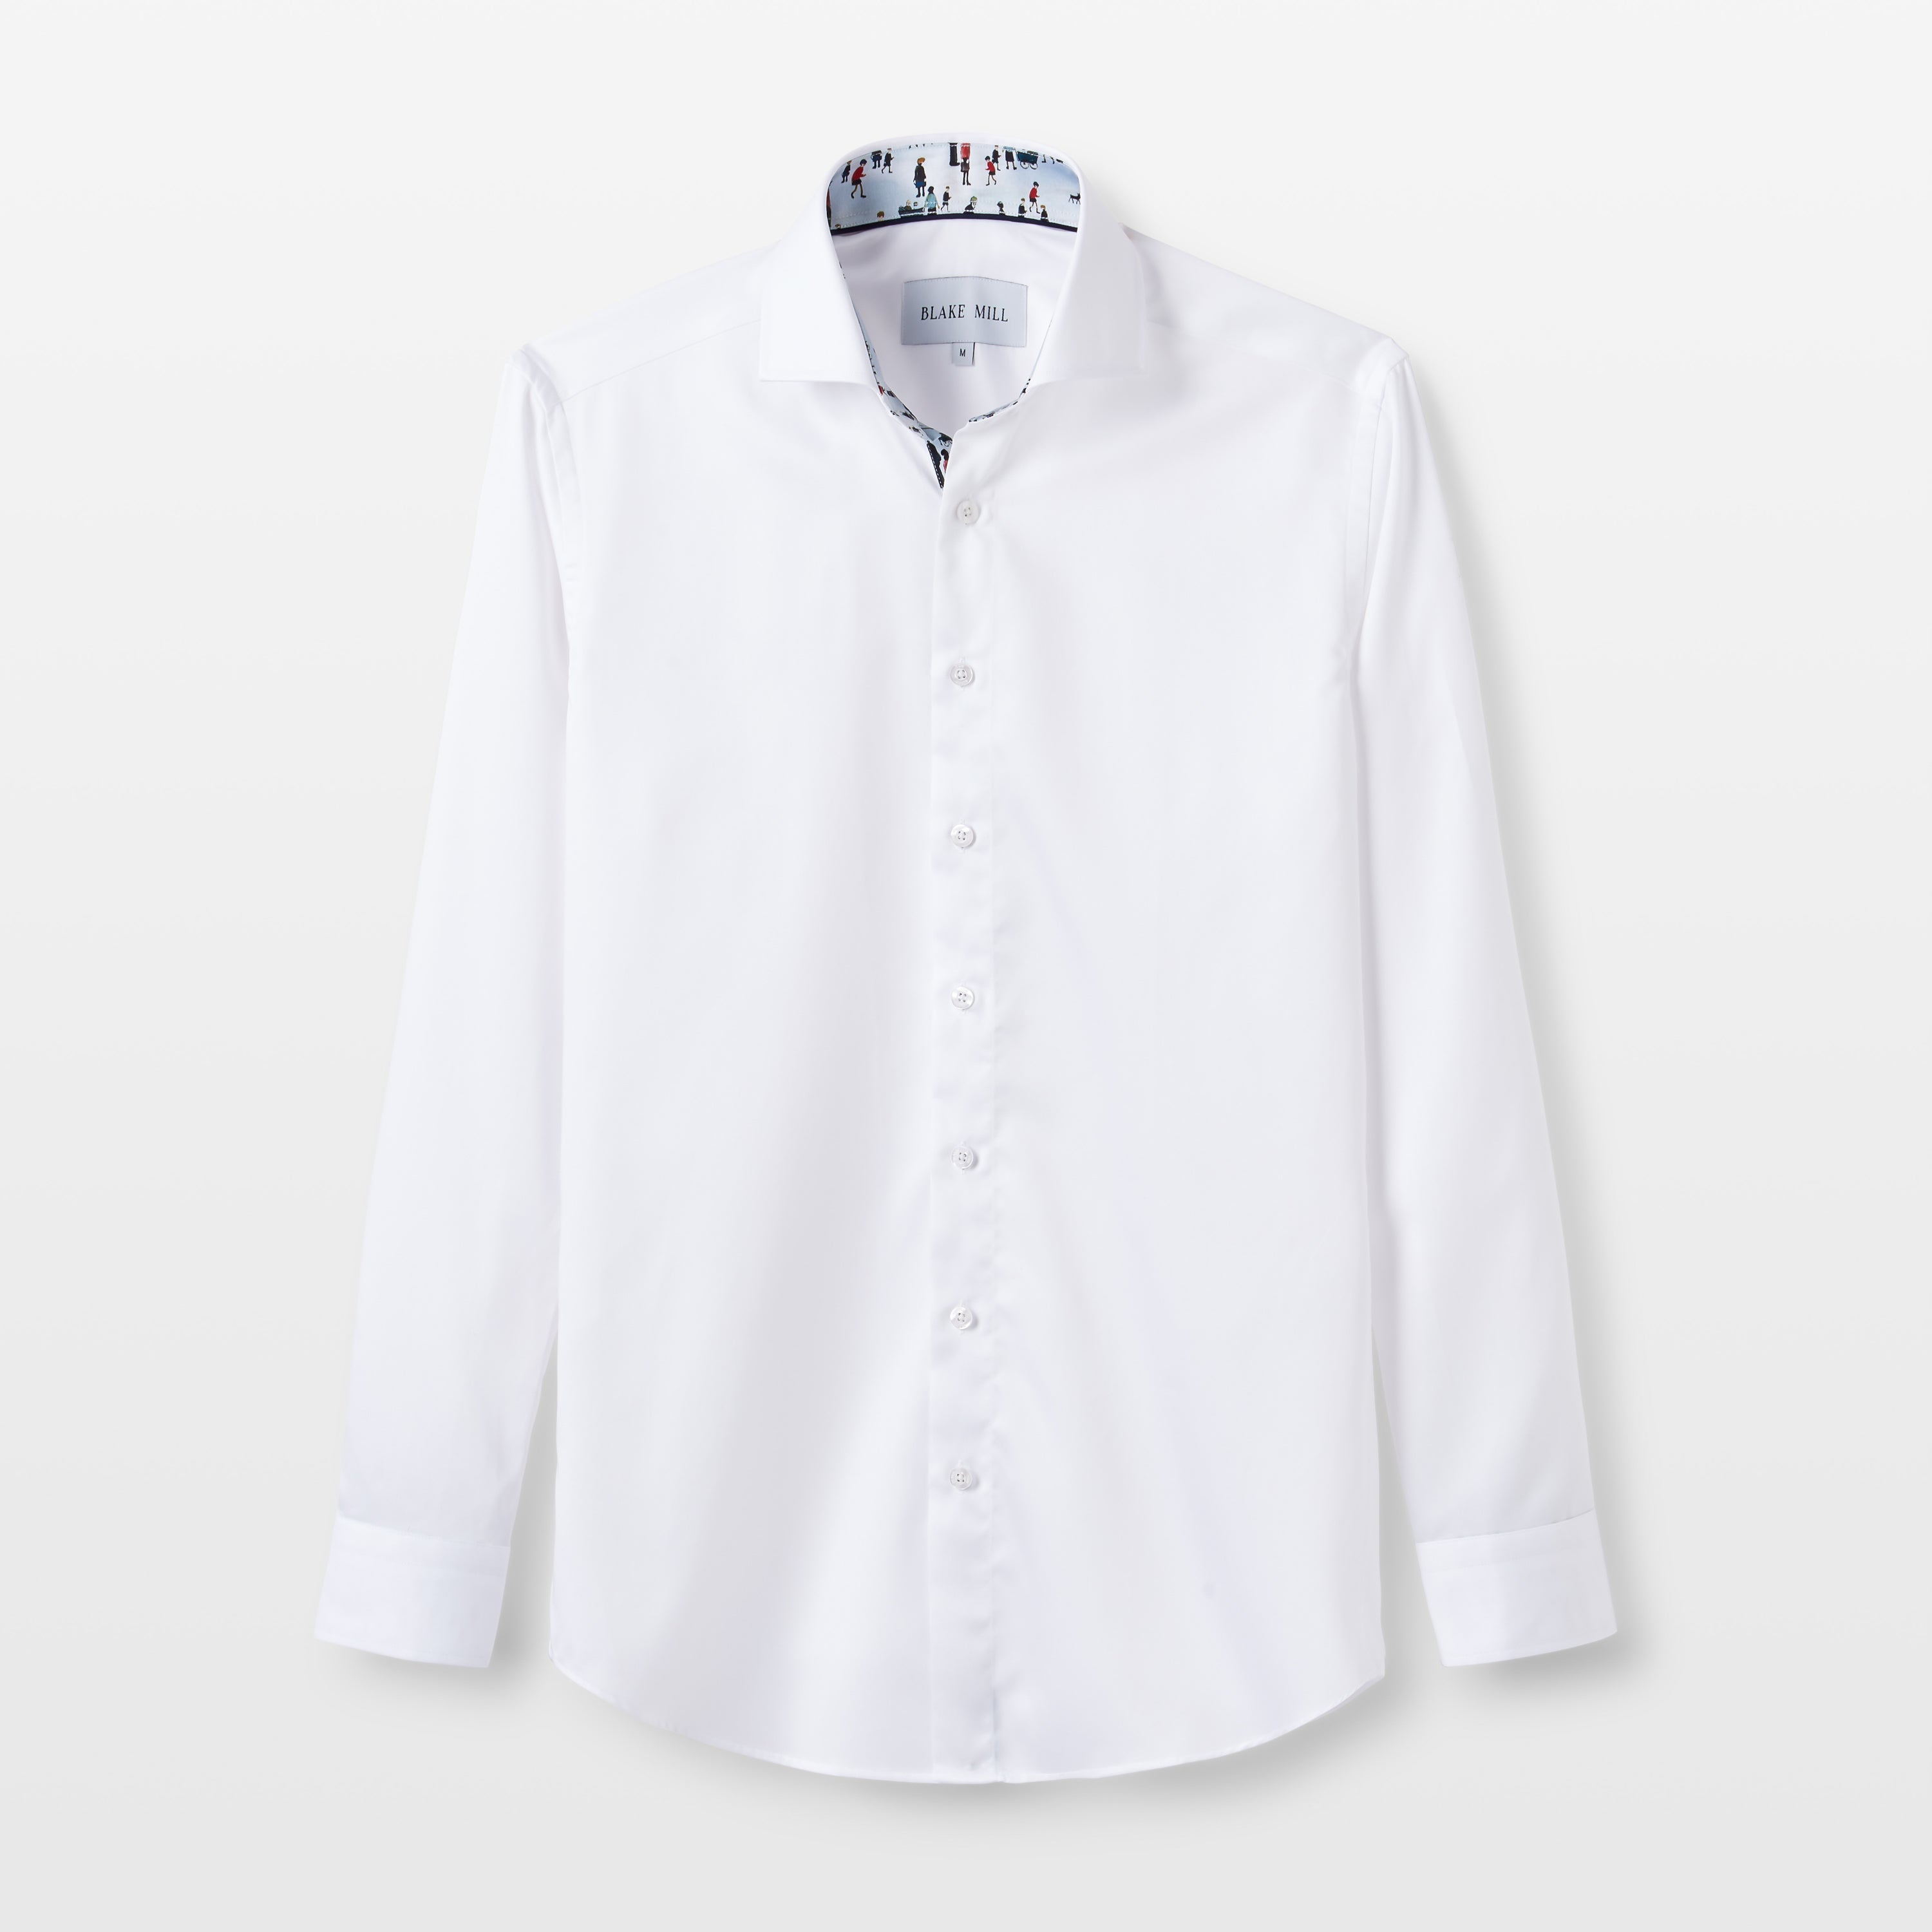 White Sateen with Lowry Blue Accents Shirt